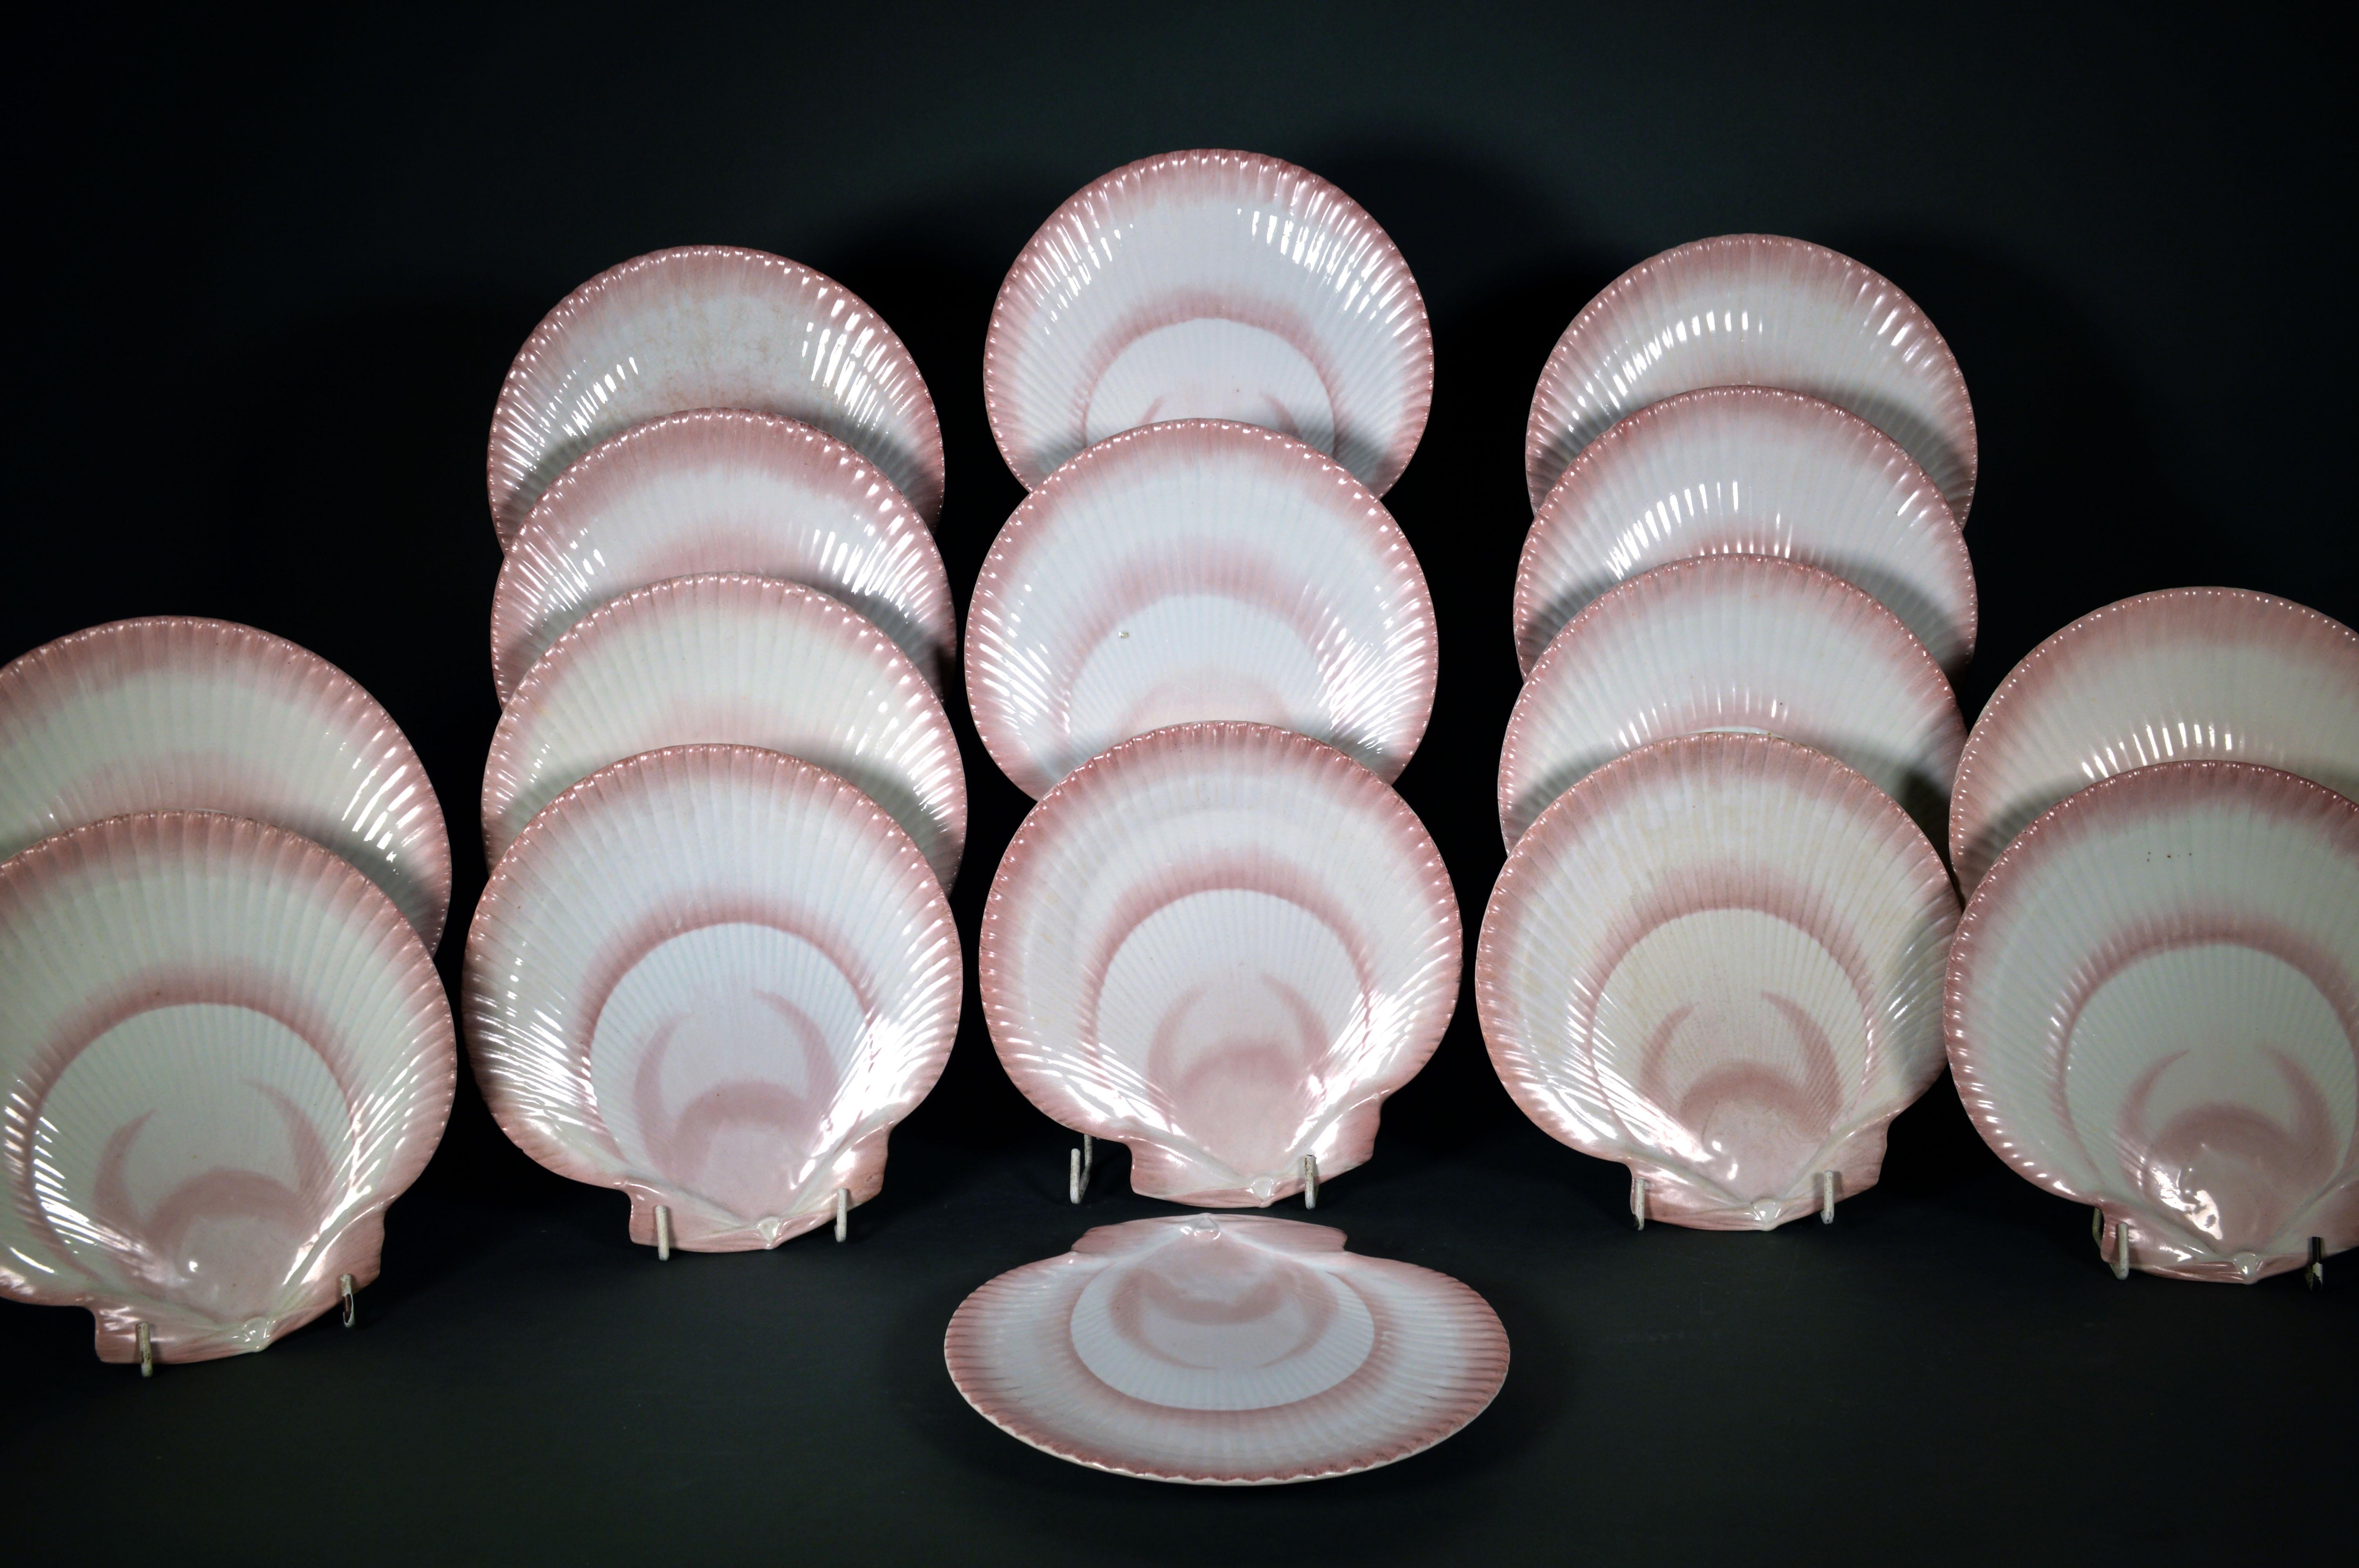 Wedgwood Nautilus pattern pearlware dessert plates- set of 14 (Fourteen)
circa 1800-20

The Wedgwood pottery Nautilus plates are light and the pearlware white and of the best quality. Each plate is painted with shades of pink and is made in the form